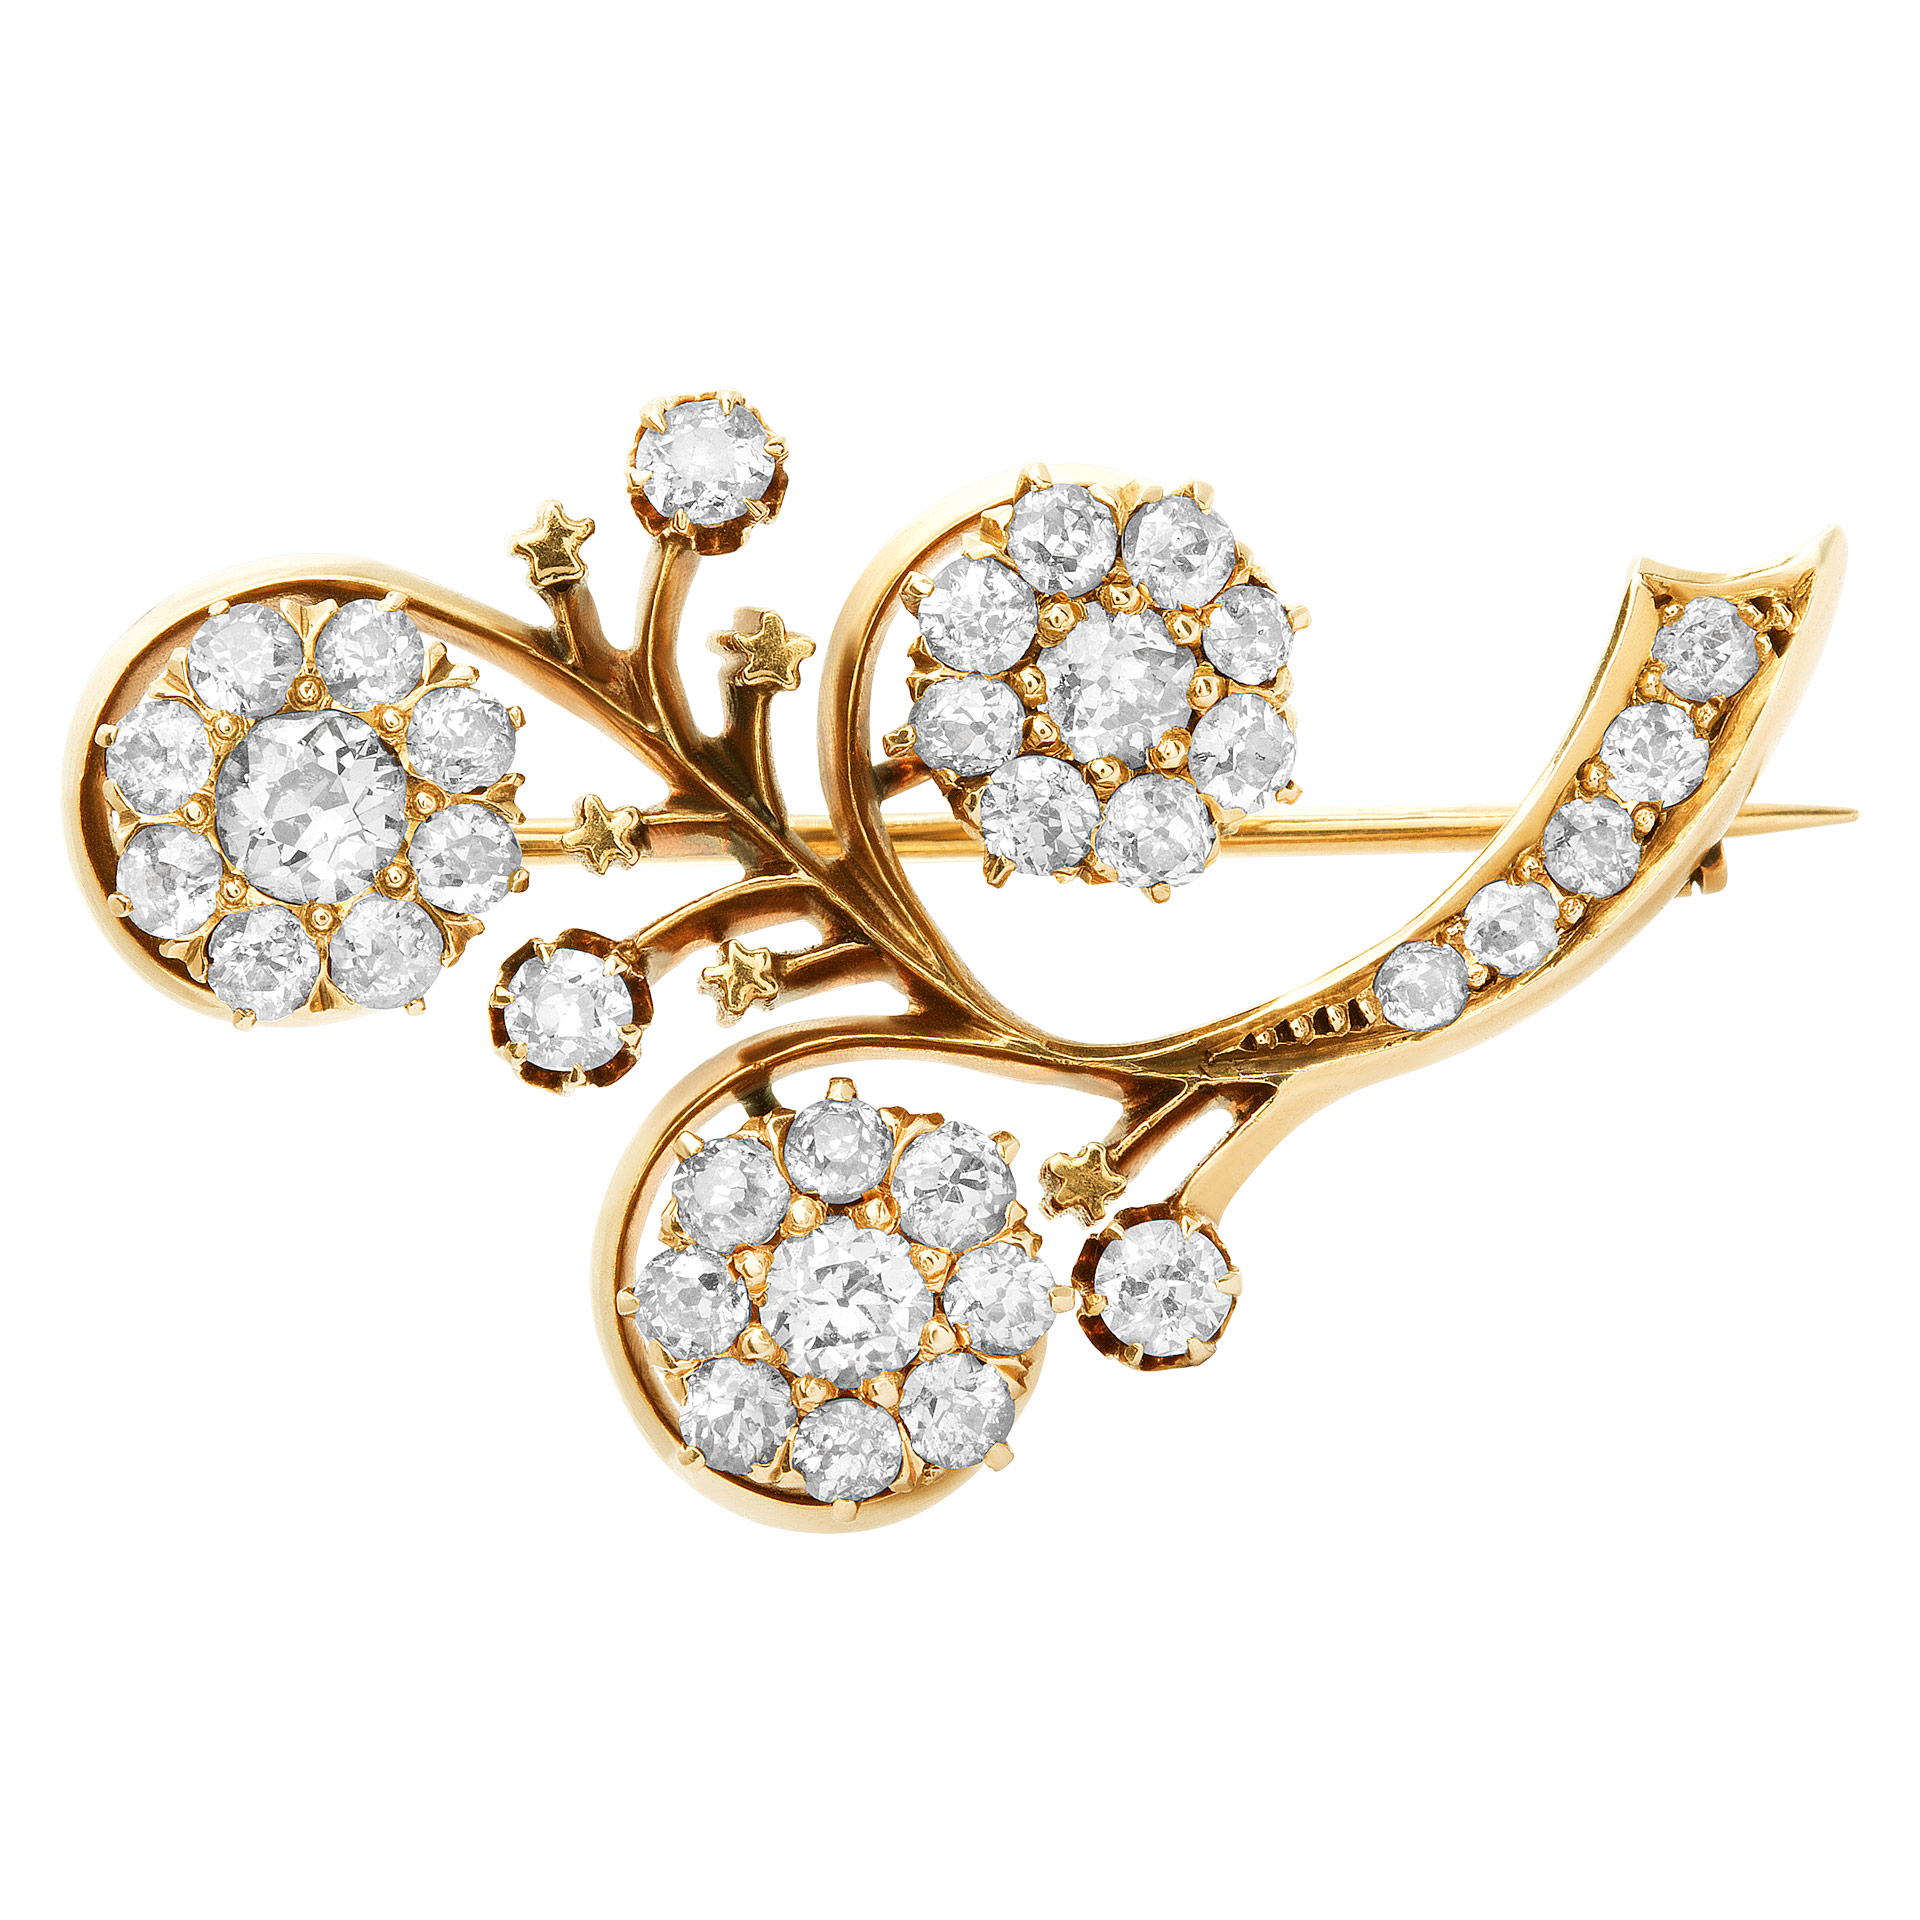 Antique Edwardian flowers and stars pin in 14k with over 3 carats in diamonds